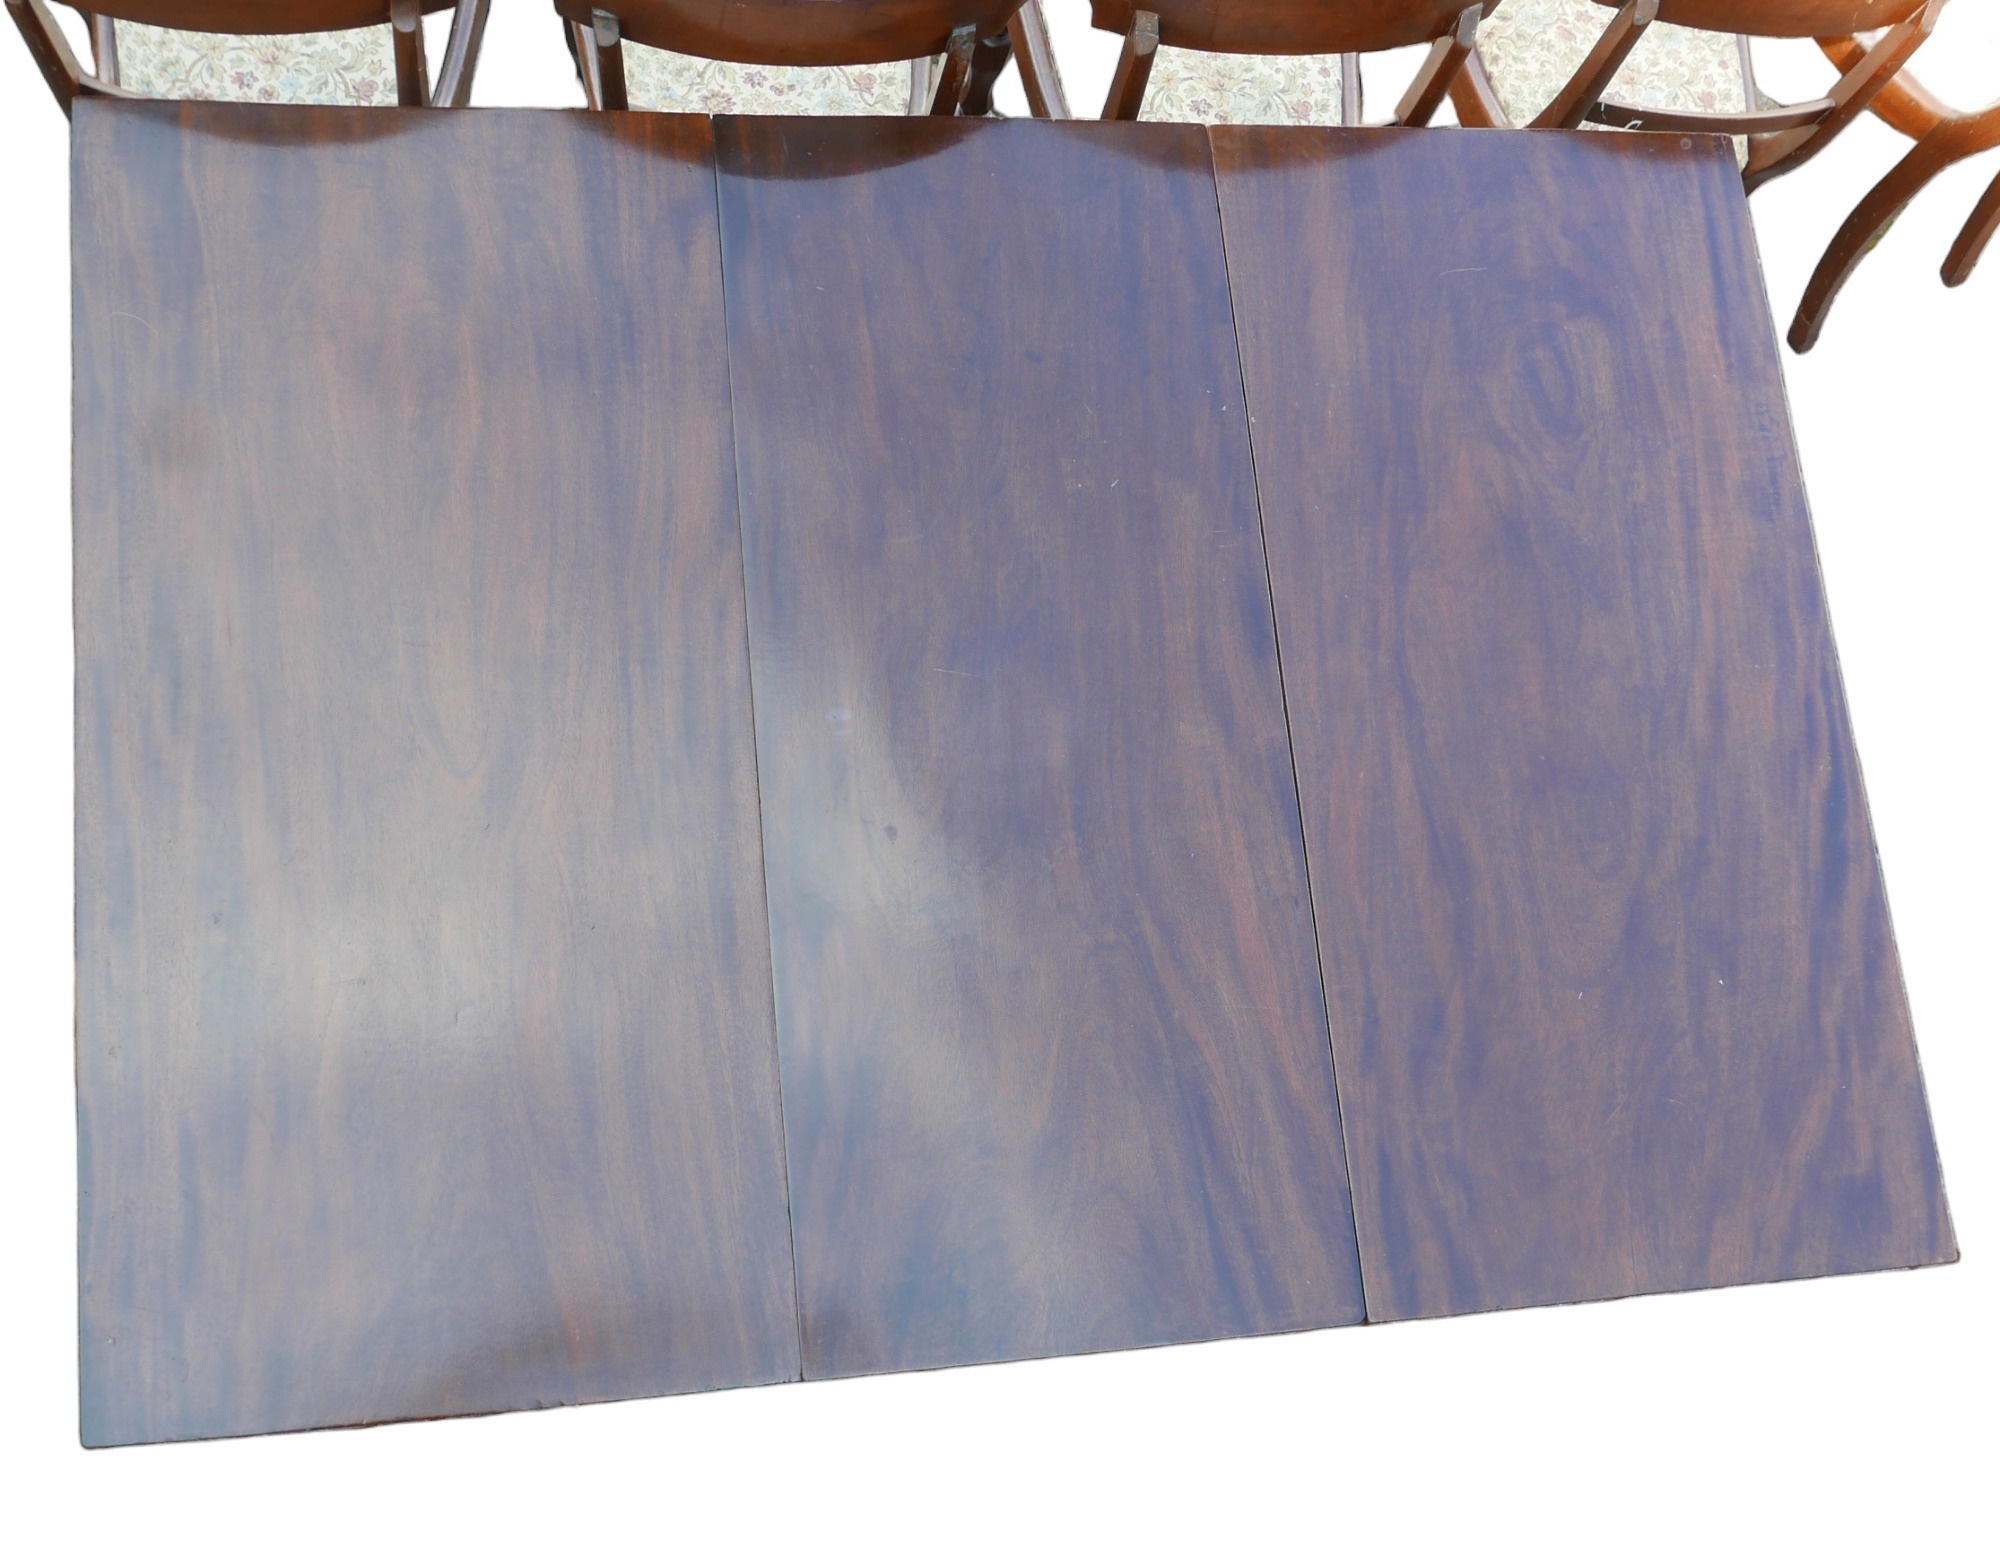 A 19th century mahogany drop leaf dining table, 121 by 54 (170 extended) by 71cm high, together with - Image 2 of 7